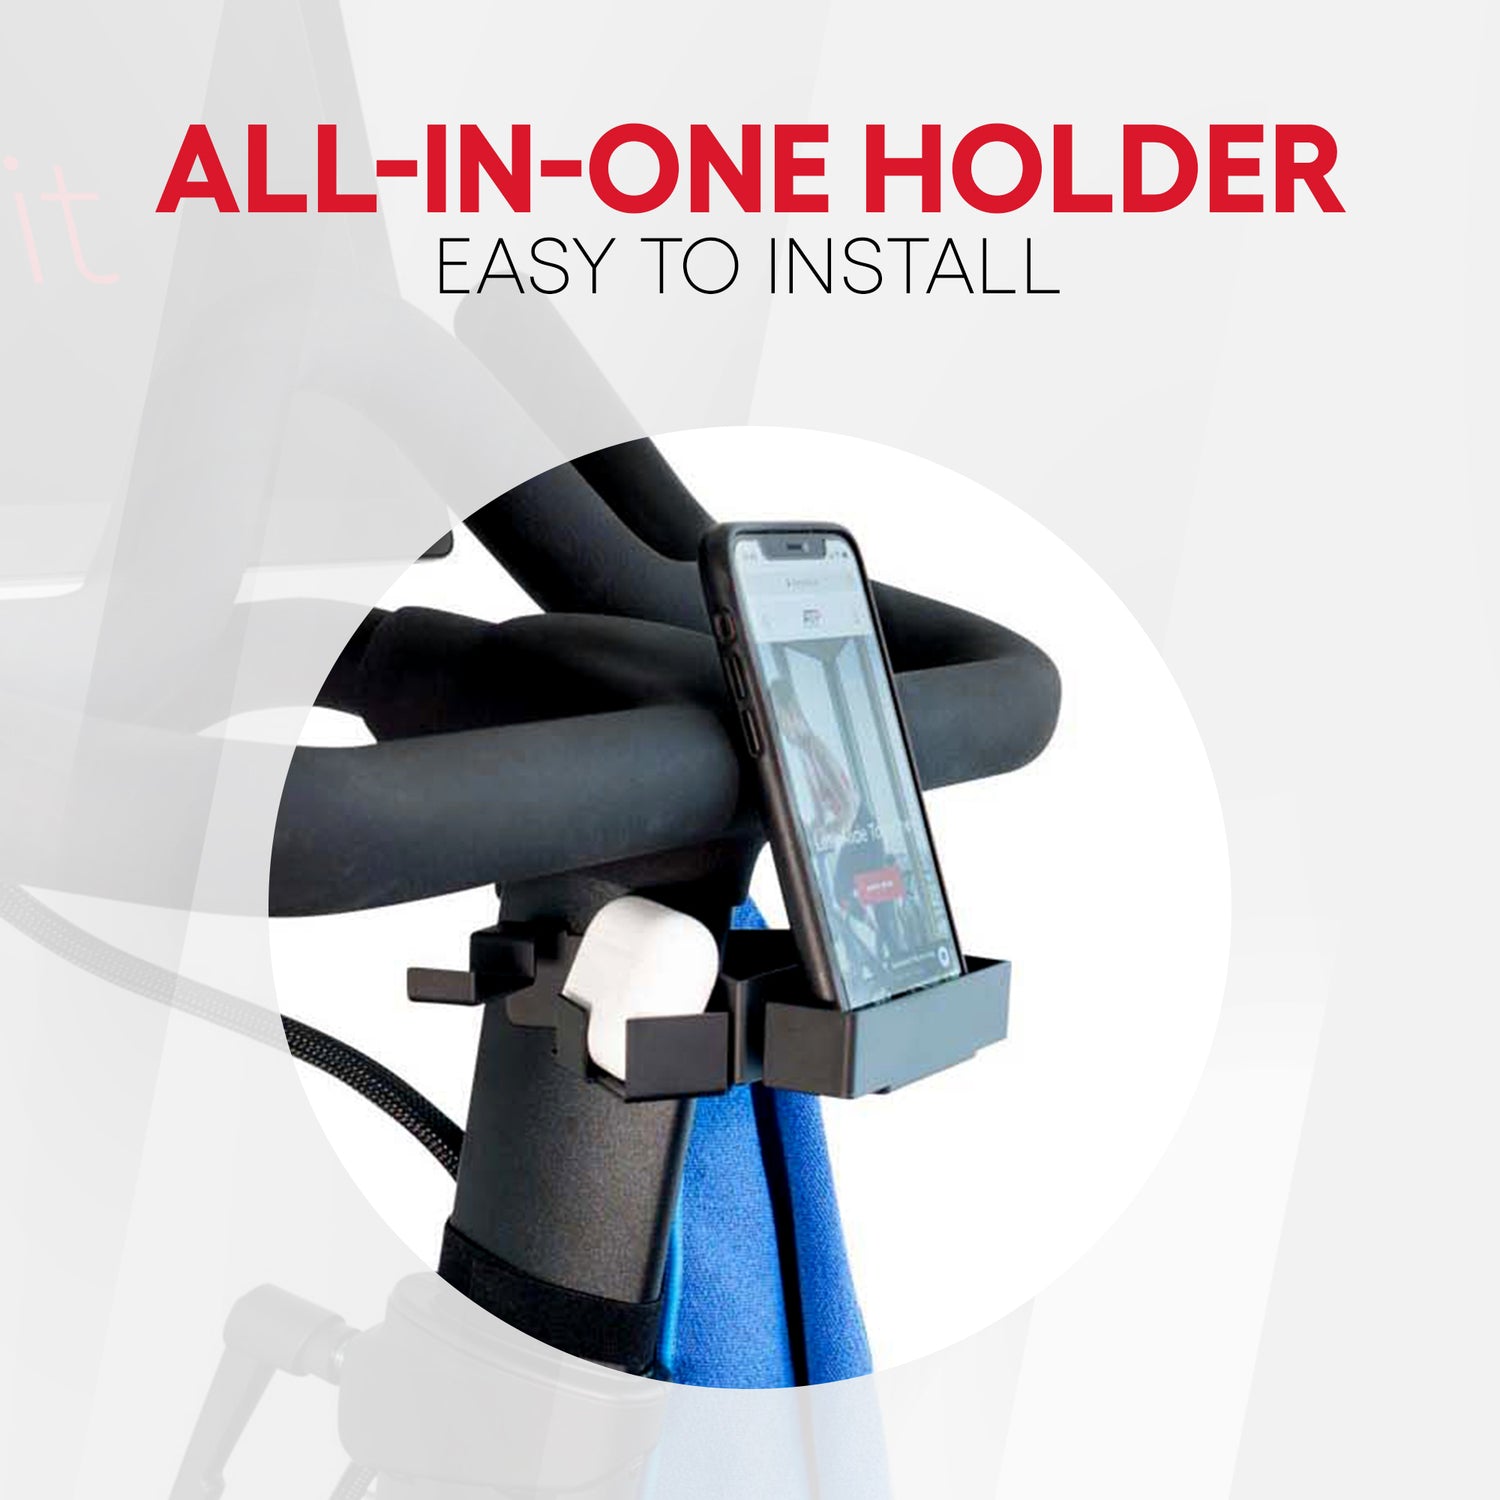 Peloton Bike and Bike+ easy to install all-in-one holder